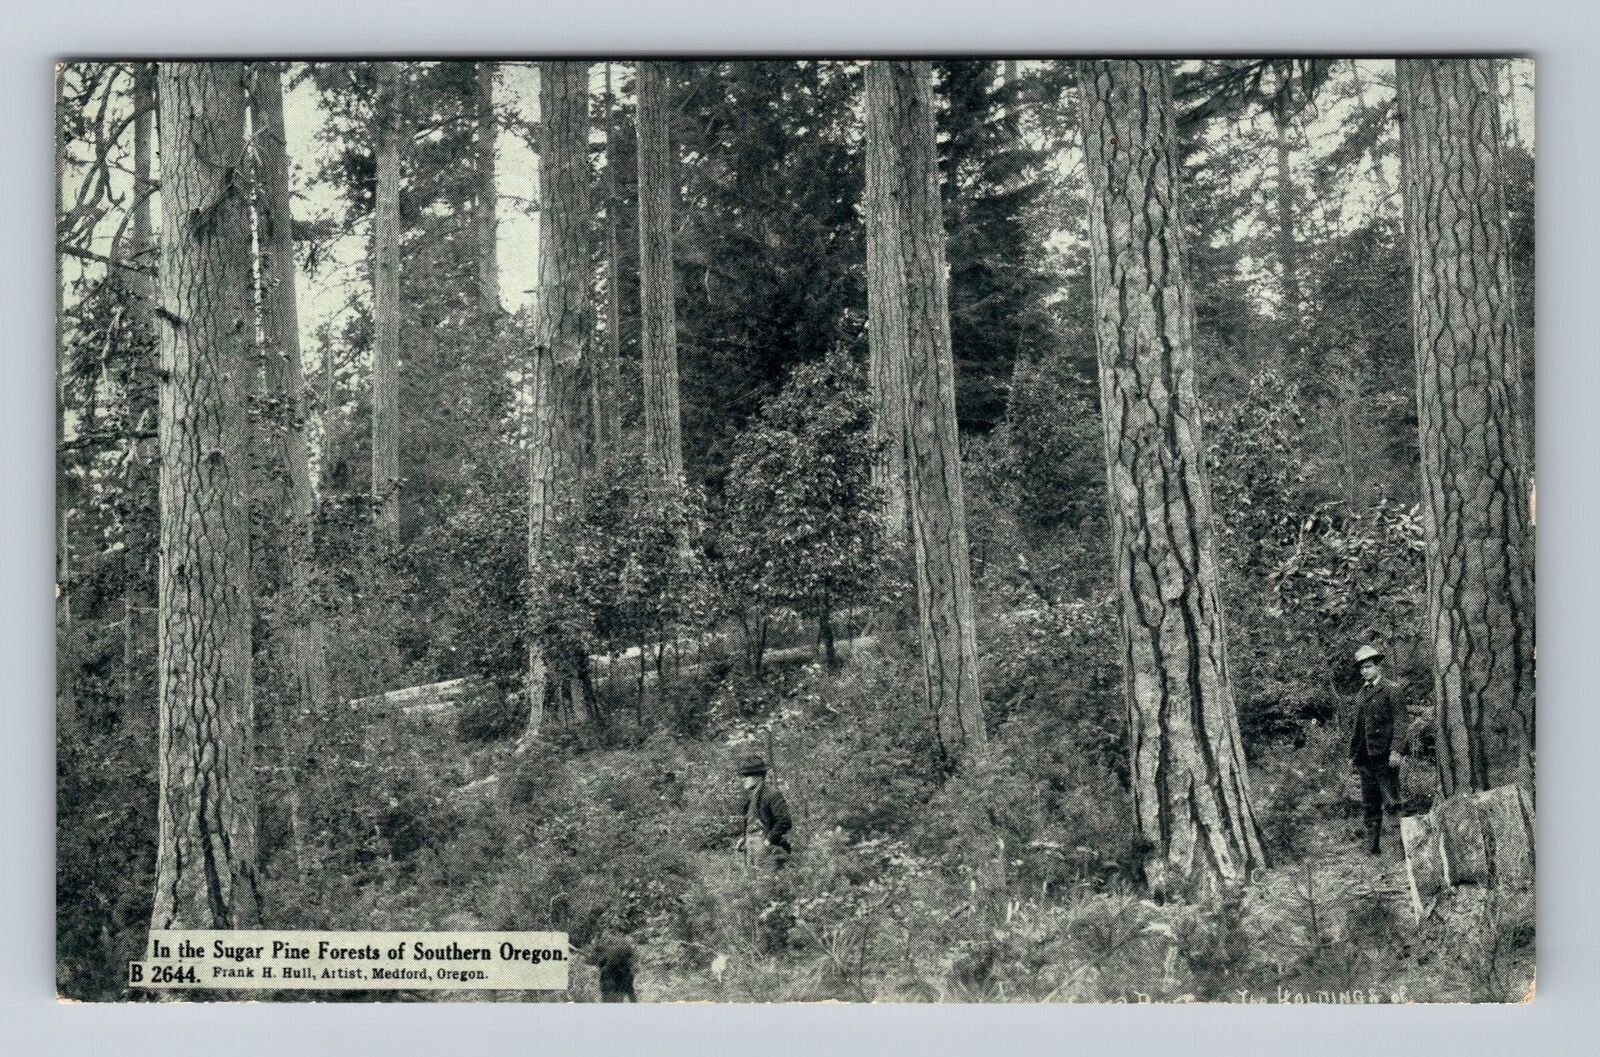 OR-Oregon, Scenic Greeting, Views in Sugar Pine Forests, Vintage Postcard